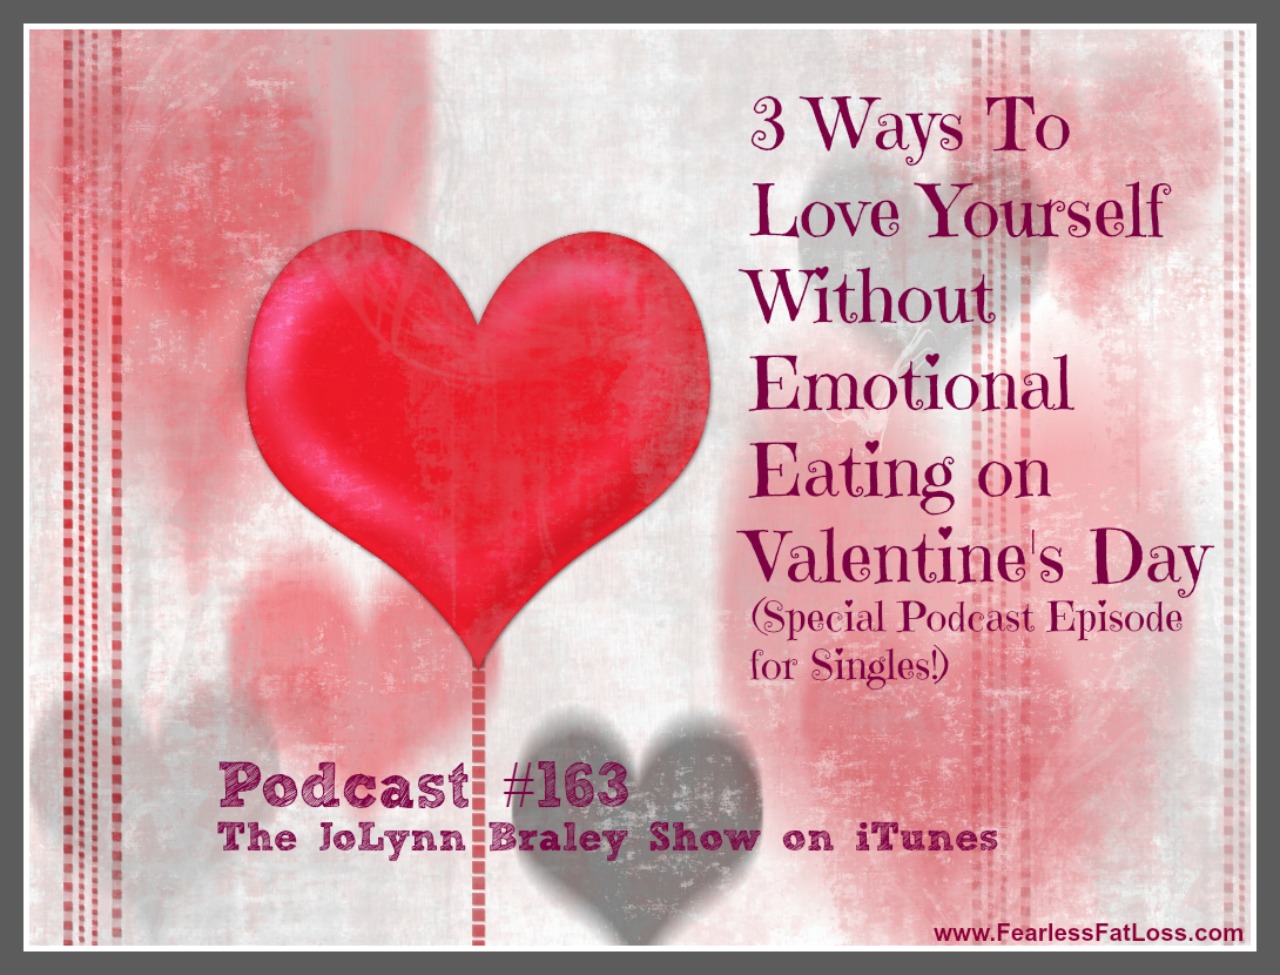 3 Ways to Love Yourself Without Emotional Eating on Valentine’s Day [Podcast #163]